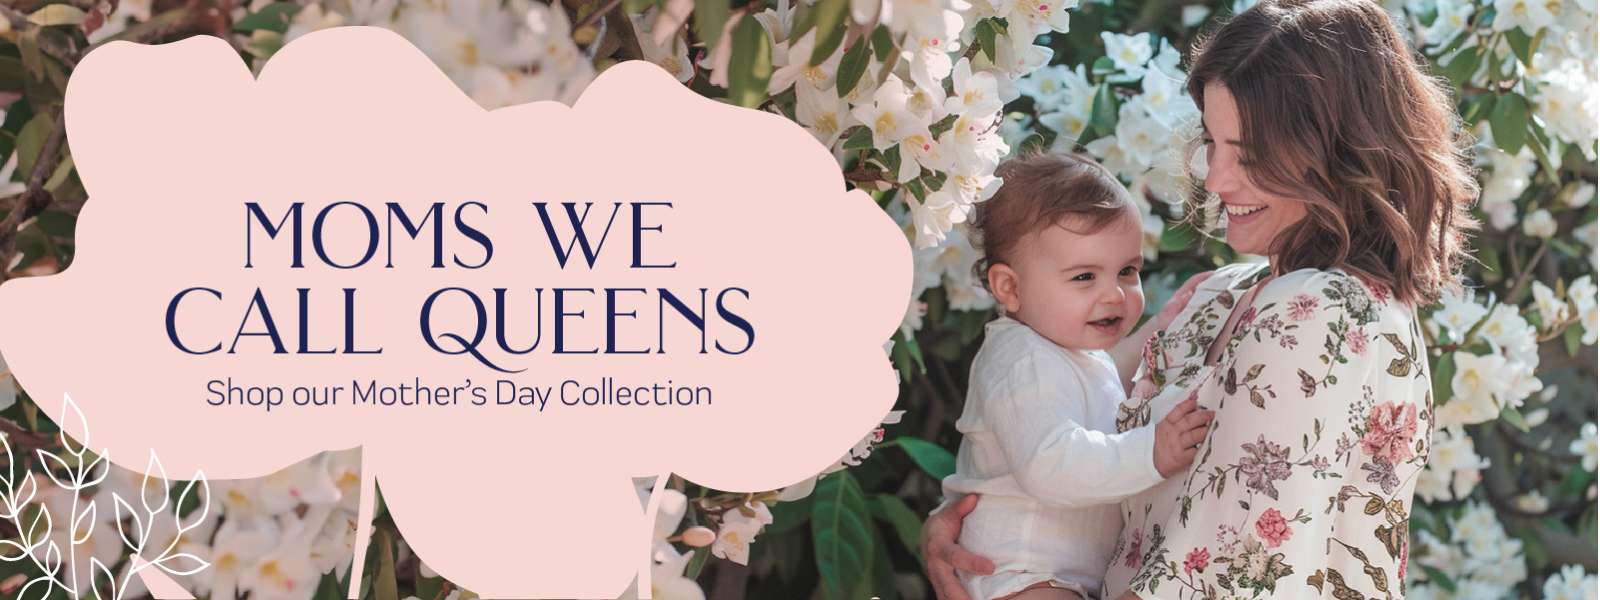 A joyful moment as a mother, cradling her giggling baby, stands amidst a blooming garden, celebrating the 'Moms We Call Queens' theme from the Fabulous Flowers and Gifts Mother's Day collection.